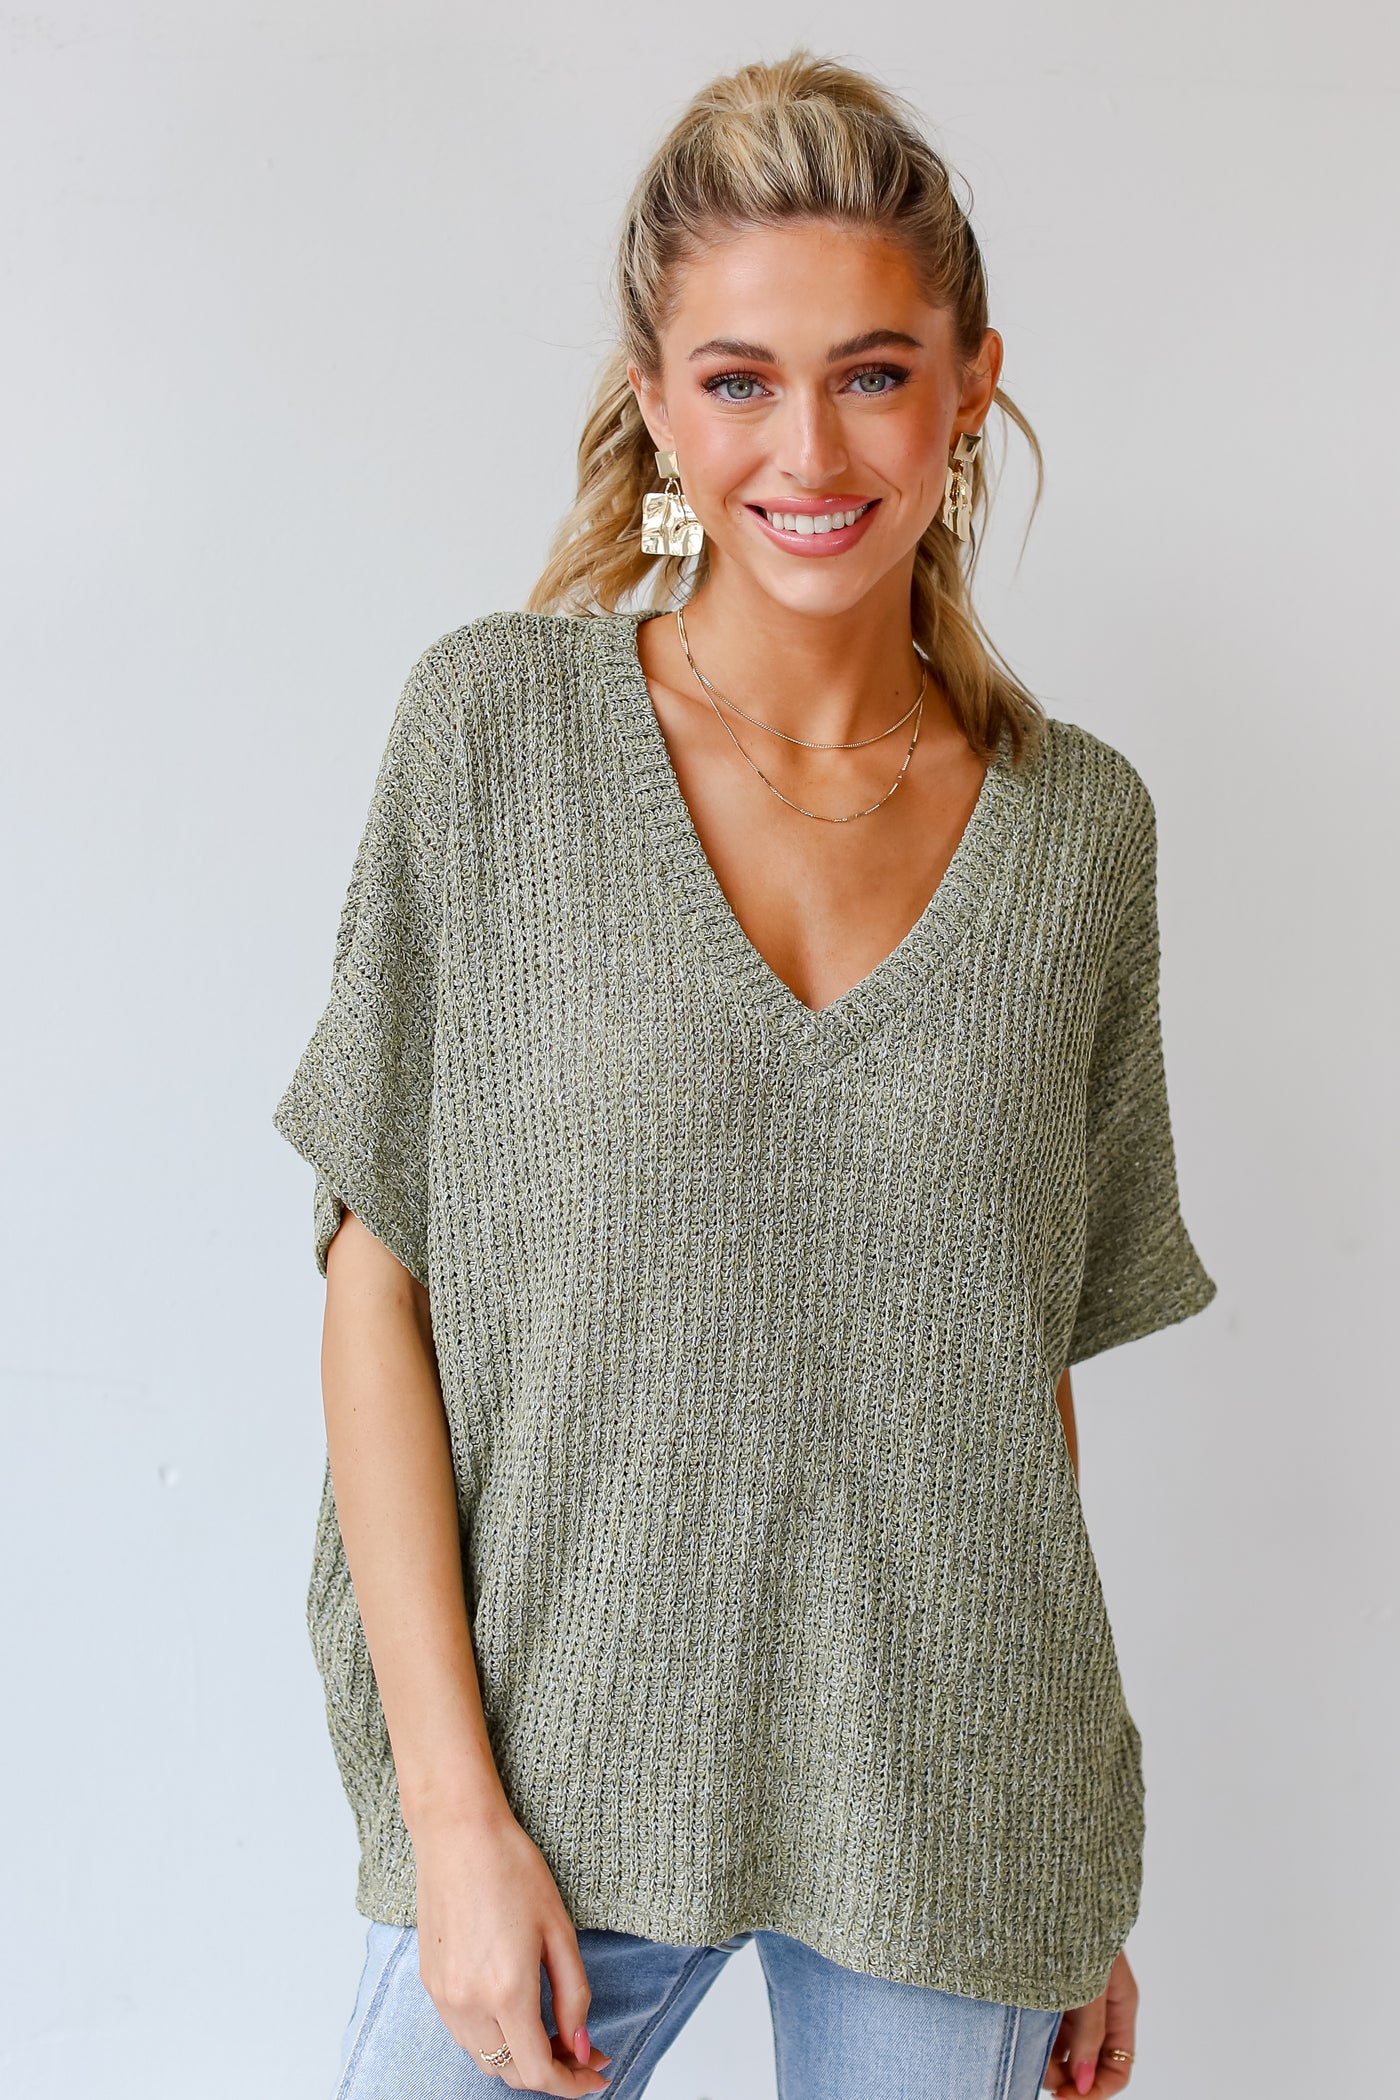 sage Lightweight Knit Top front view